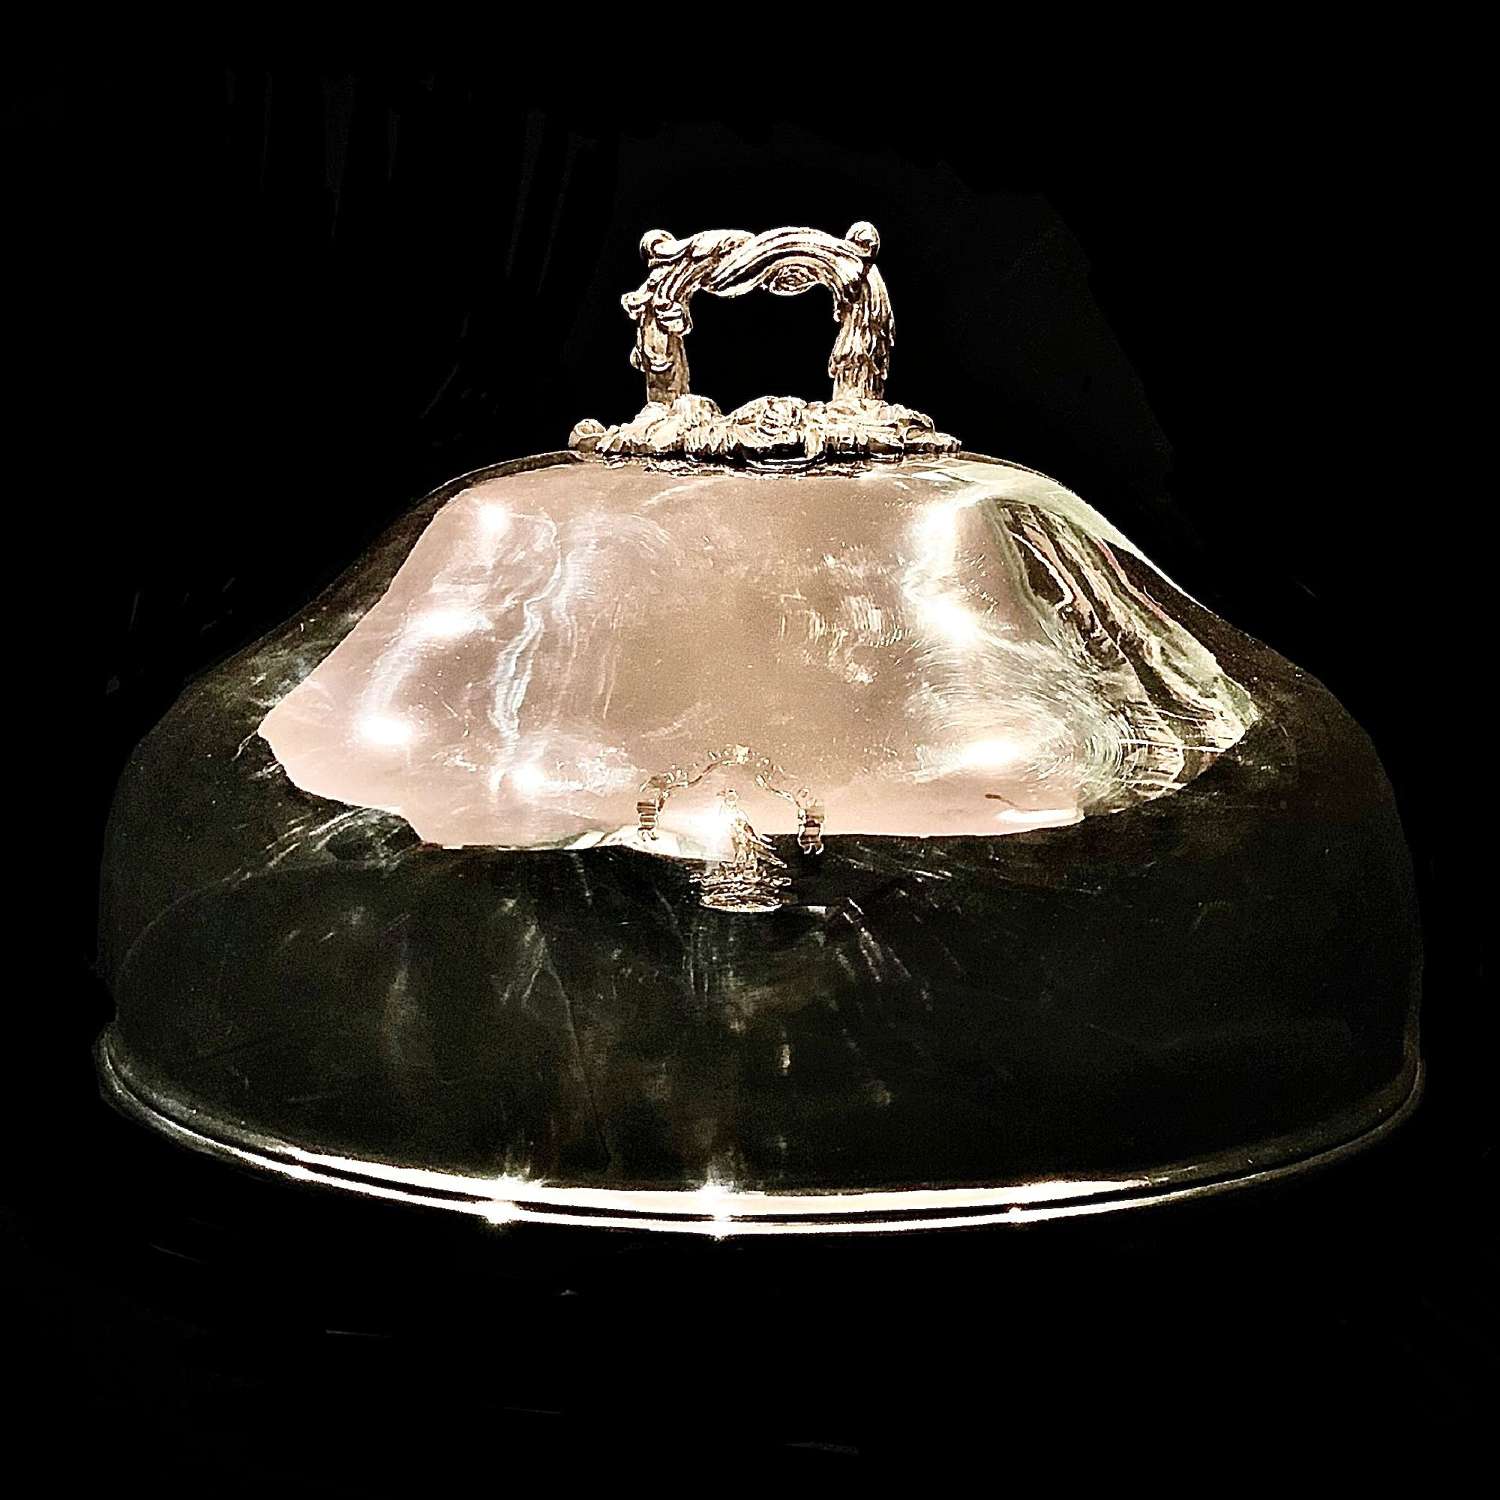 A Fine Engraved Crest Silver Plated Meat Cover, Food Cloche or Dome